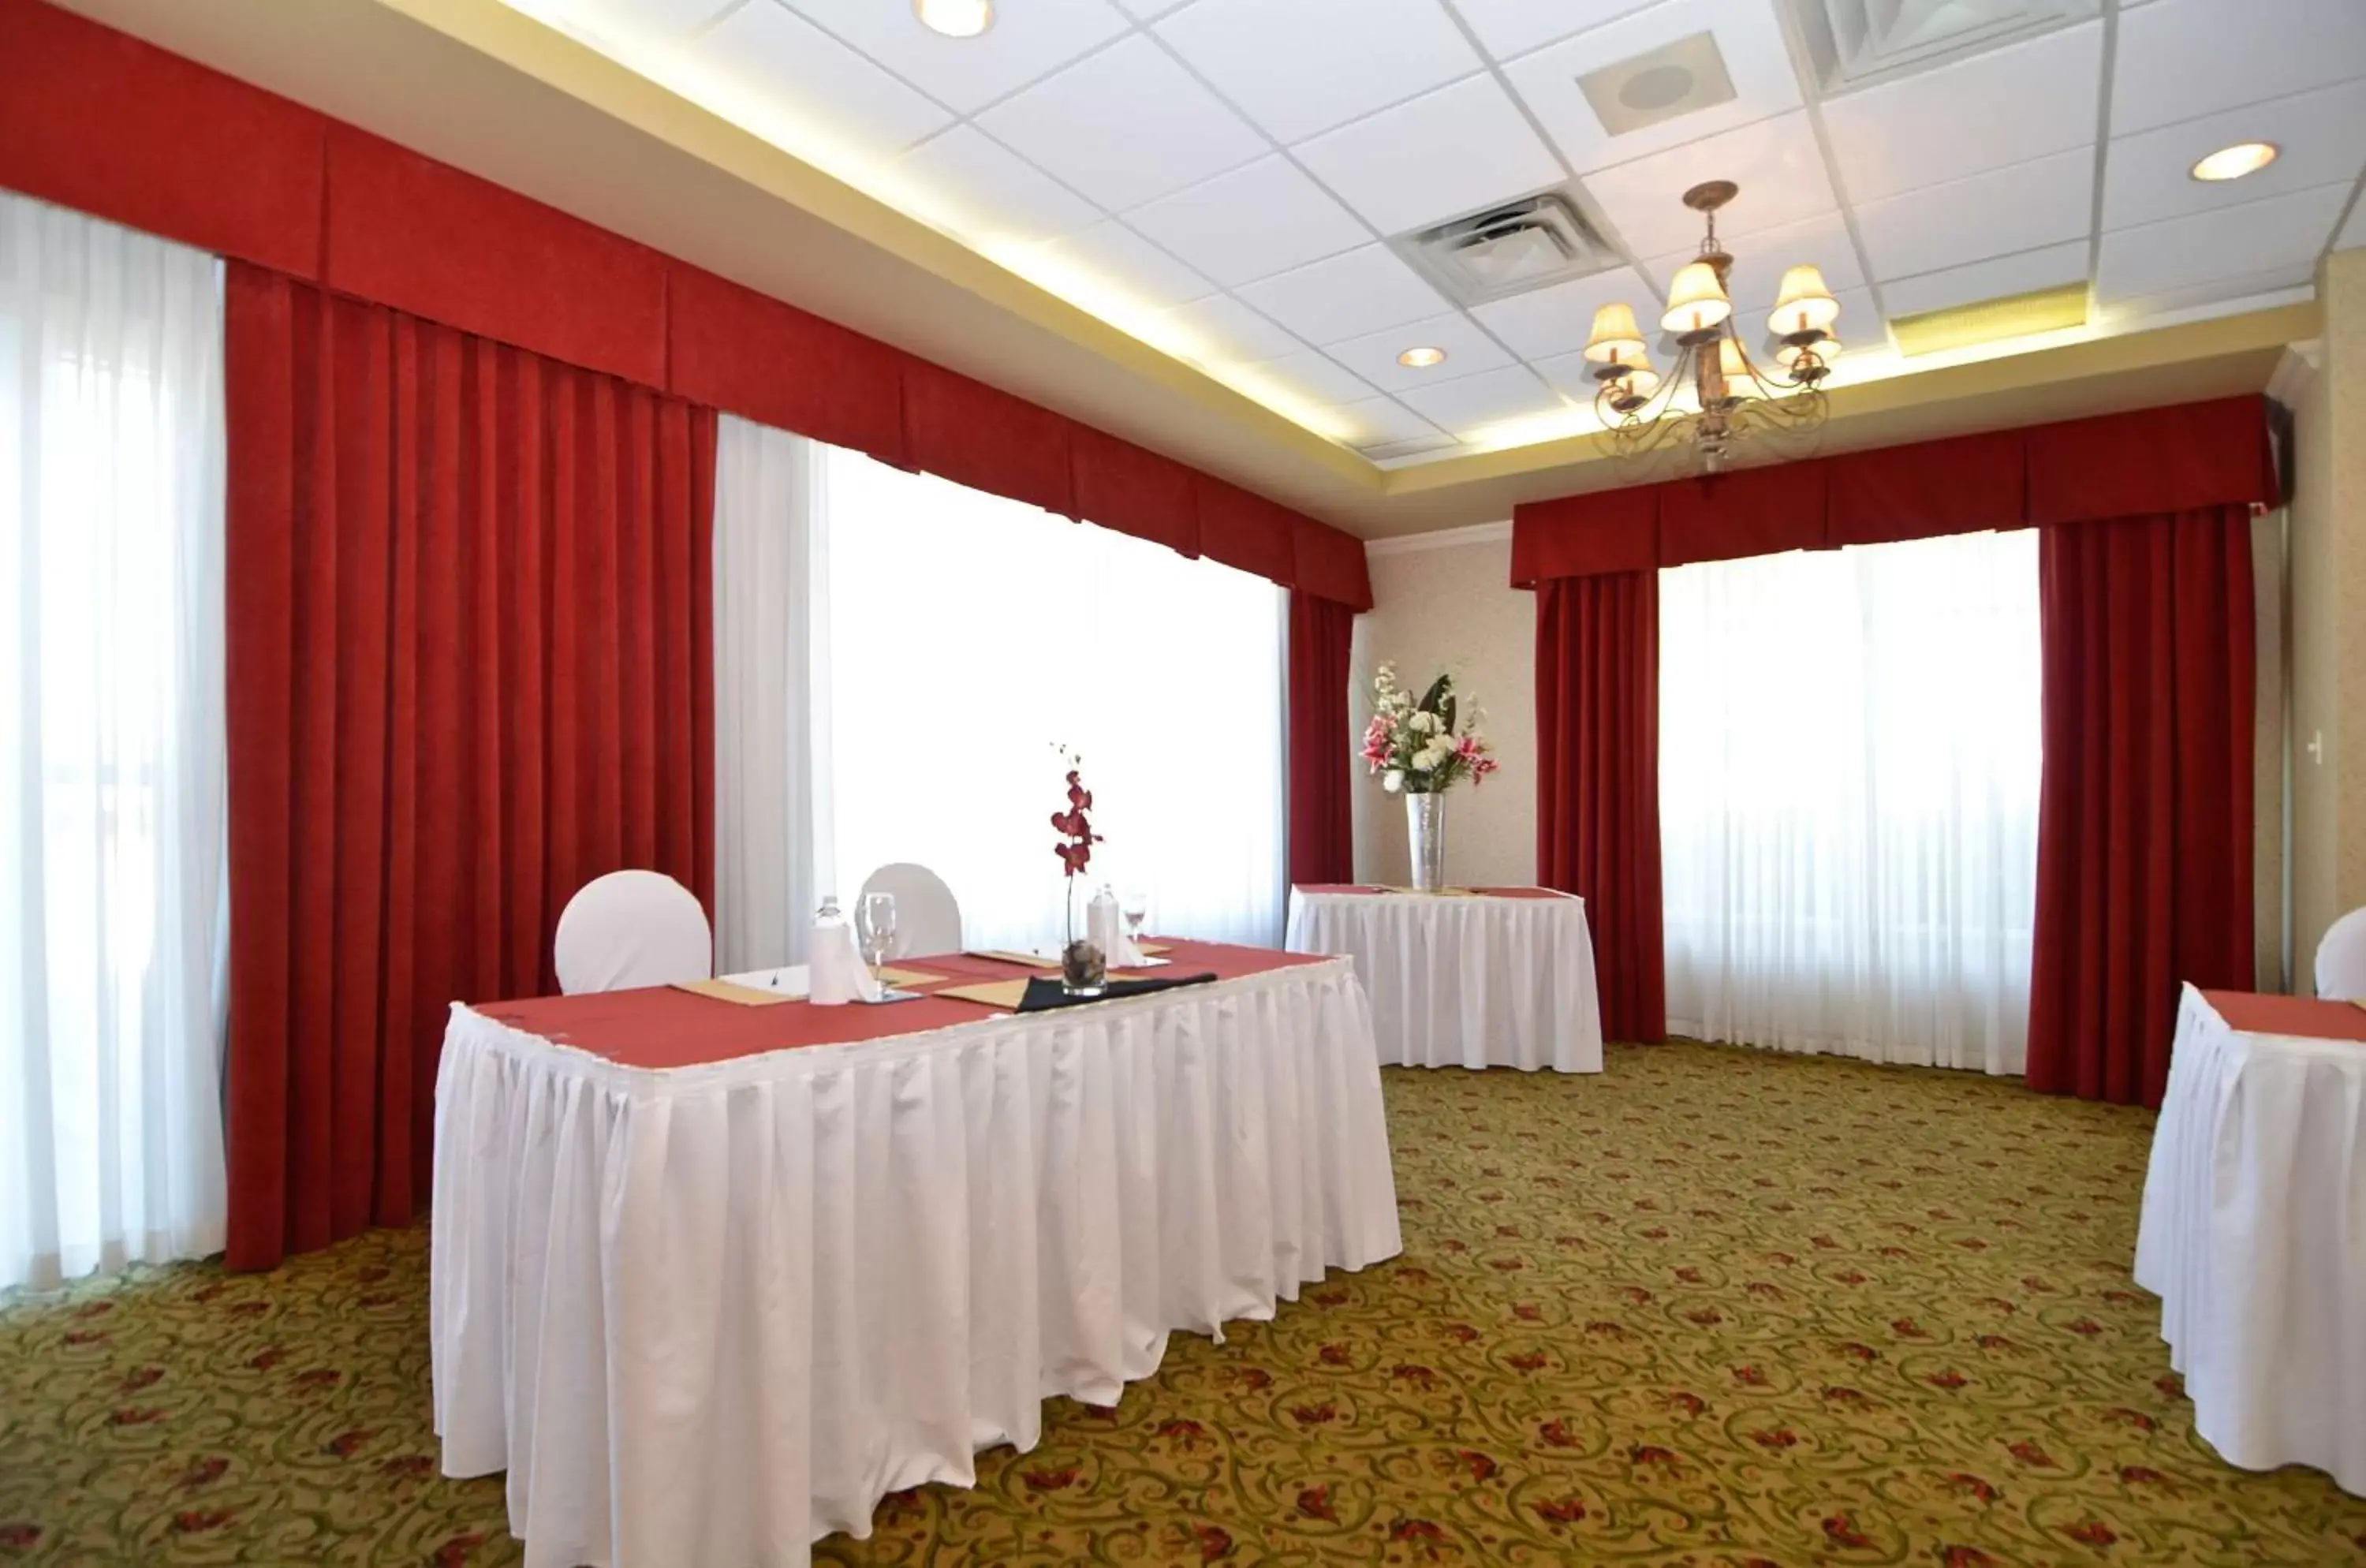 On site, Banquet Facilities in Best Western Plus Regency Inn and Conference Centre